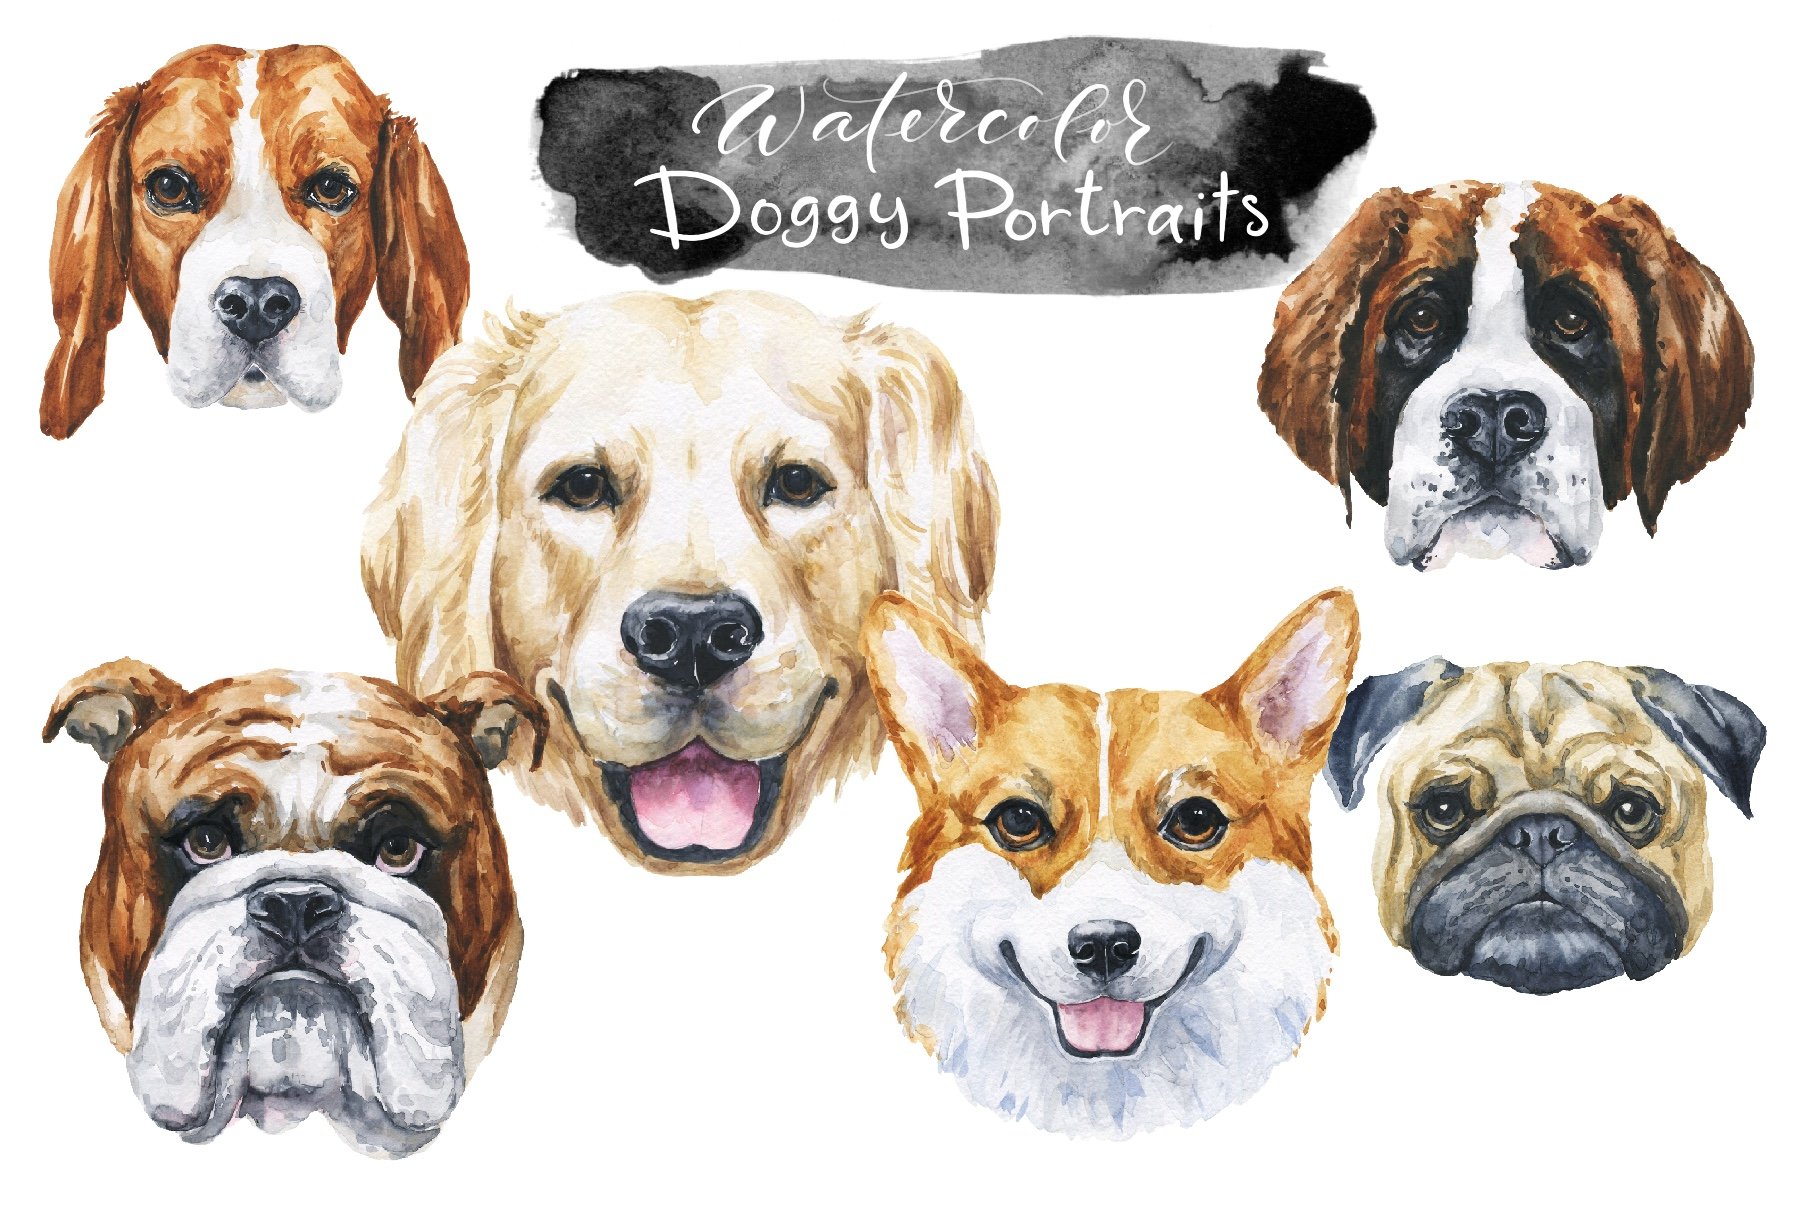 Watercolor Doggy Portraits cover image.